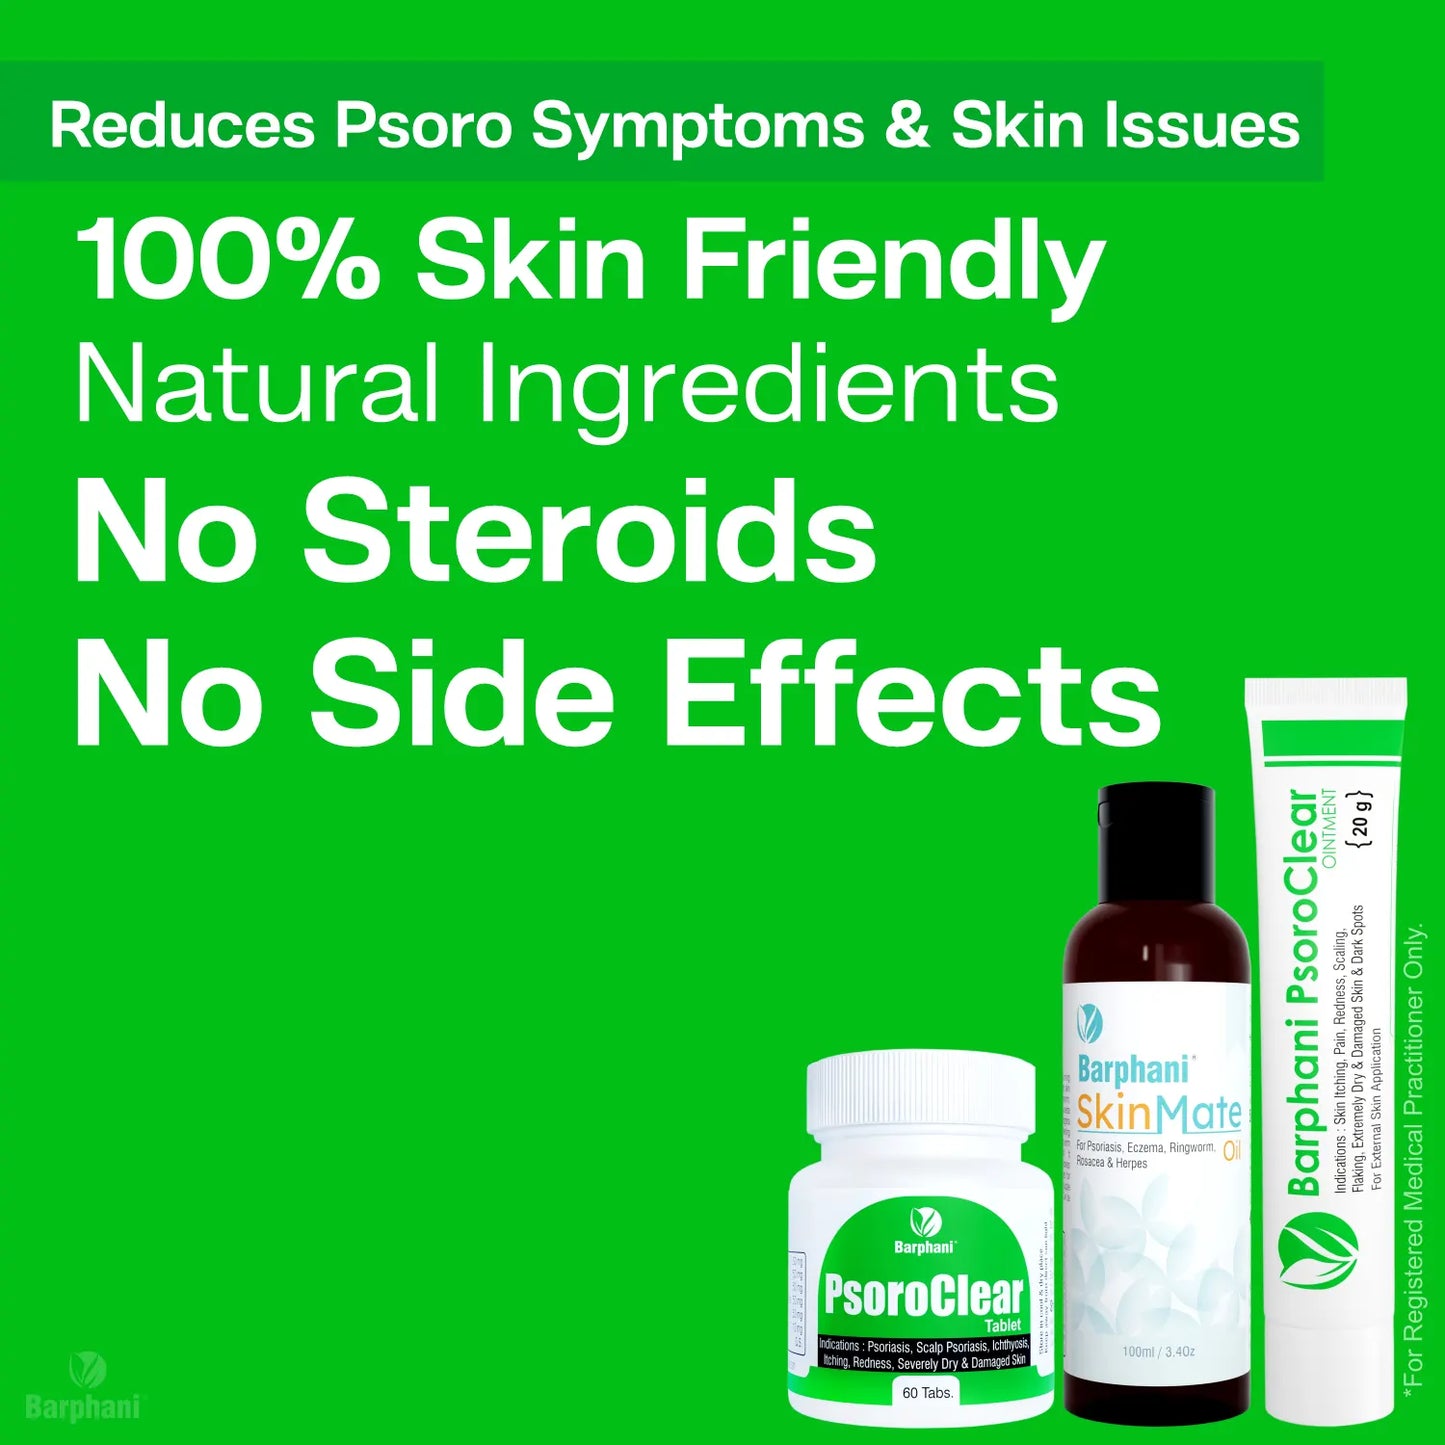 Barphani PsoroClear Trio Pack - Psoriasis Cream(4) PsoroClear Tab(60) SkinMate Oil(100ml) Longterm Psoro Relief